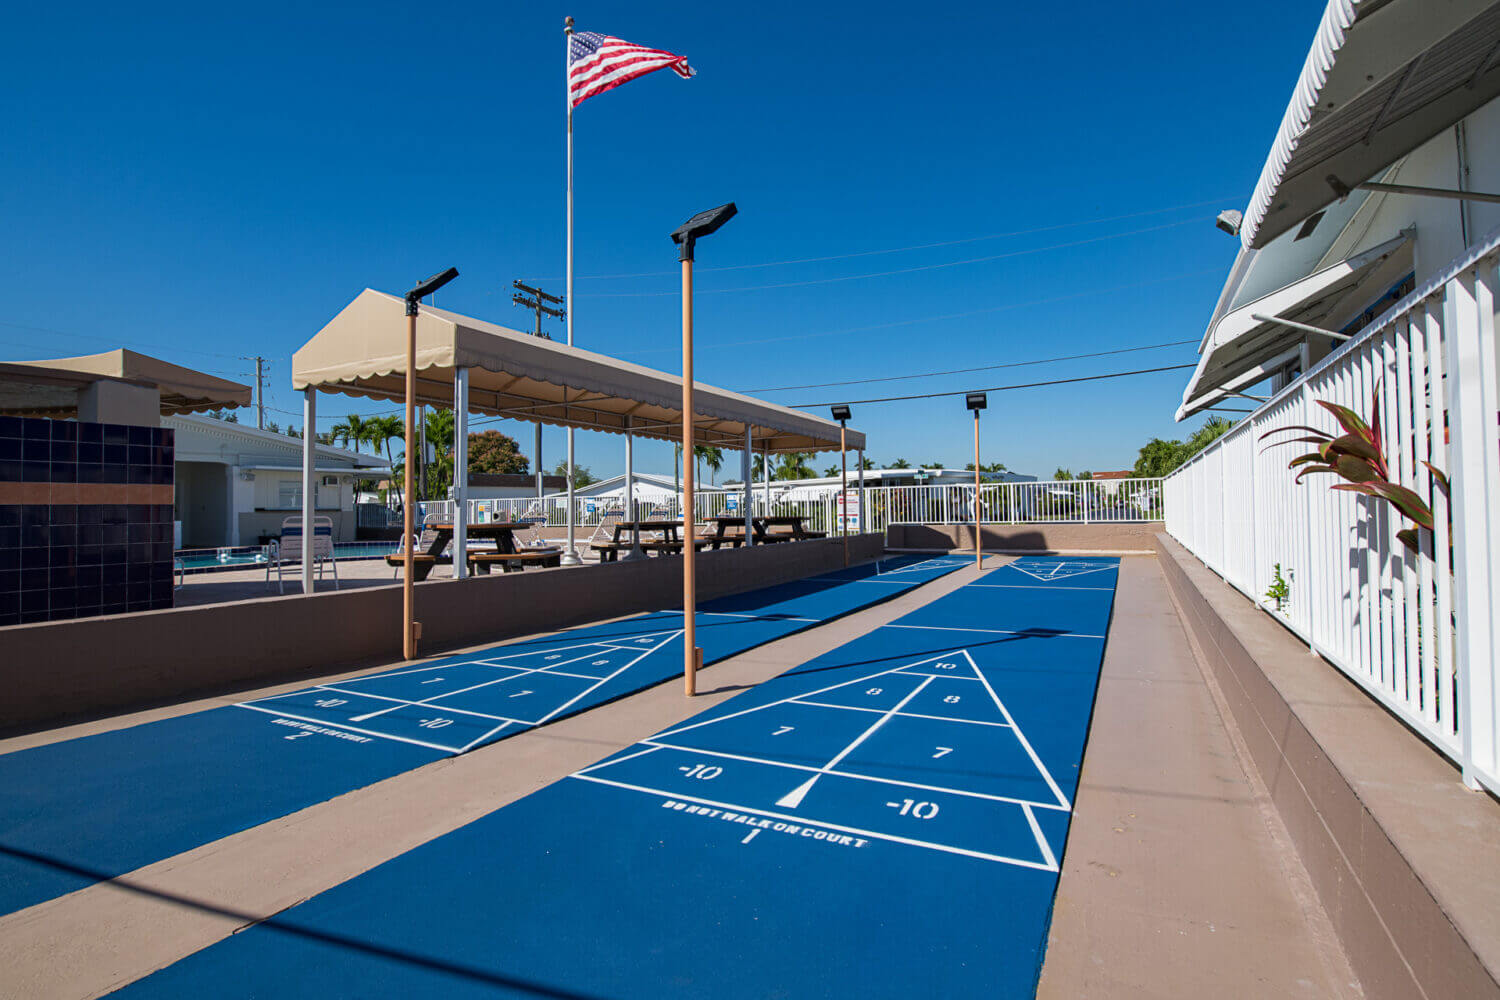 Blue outfdoor shuffleboard courts with pole lamps at a fenced area.